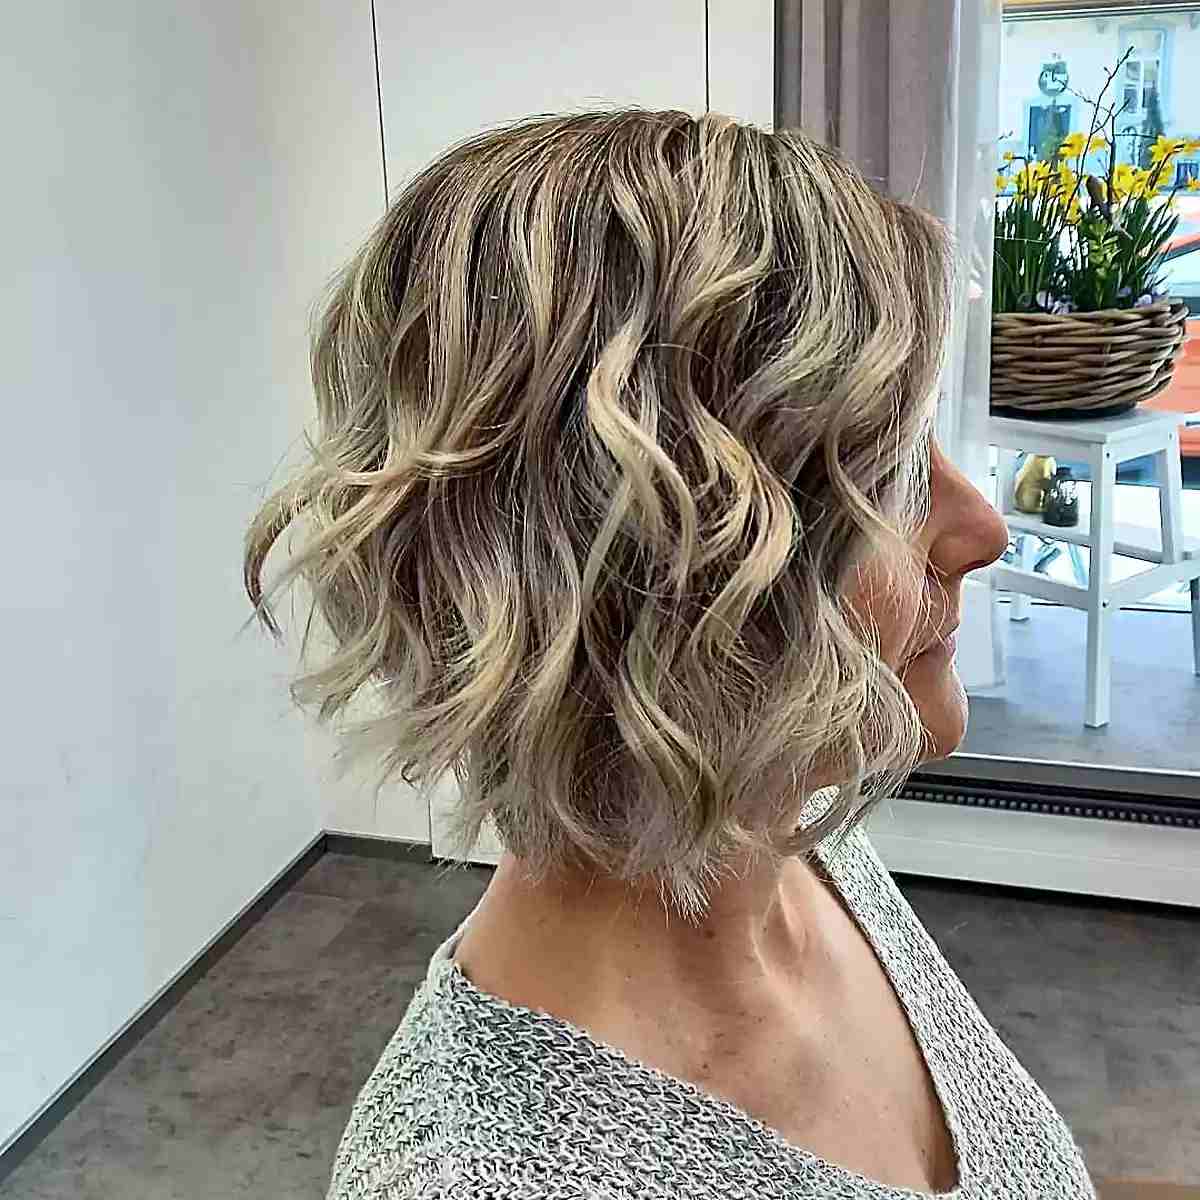 Neck-Length Rooted Blonde Wavy Choppy Bob for 60-year-olds